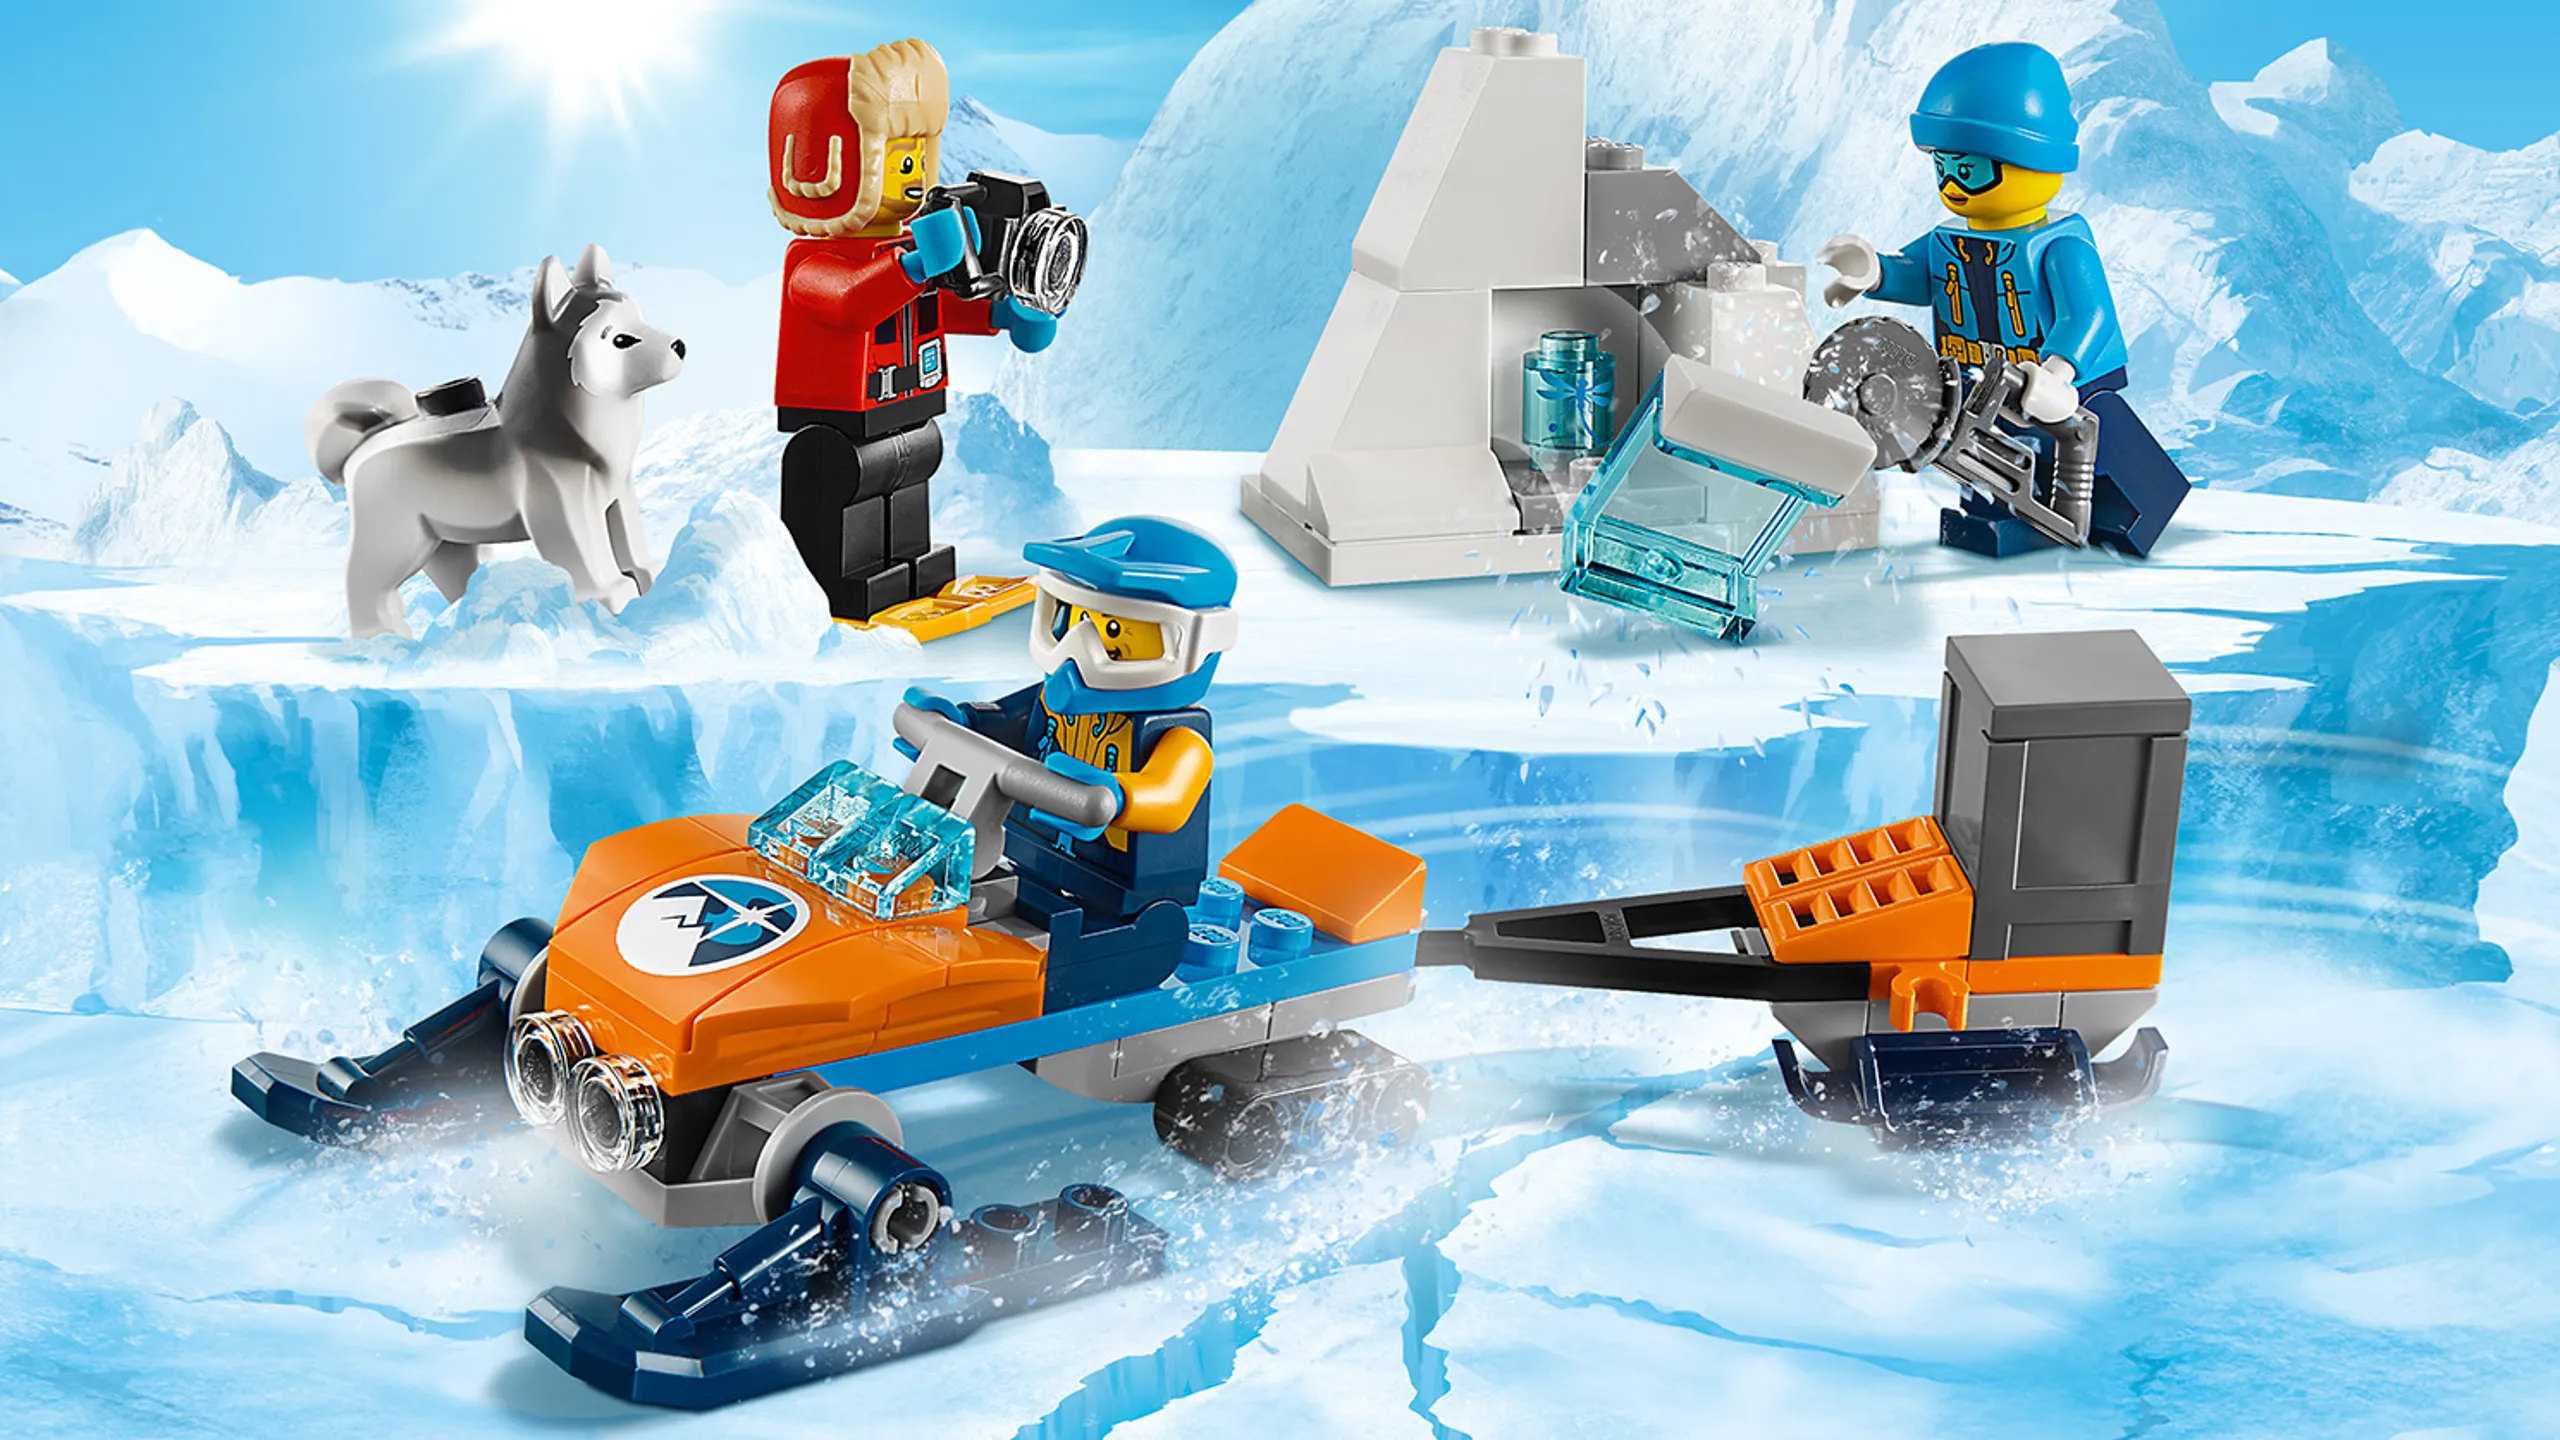 LEGO City Arctic Expedition - 60191 Arctic Exploration Team - The workers cut in ice and rocks to find fossils that they can transport on the ice glider and take pictures of.